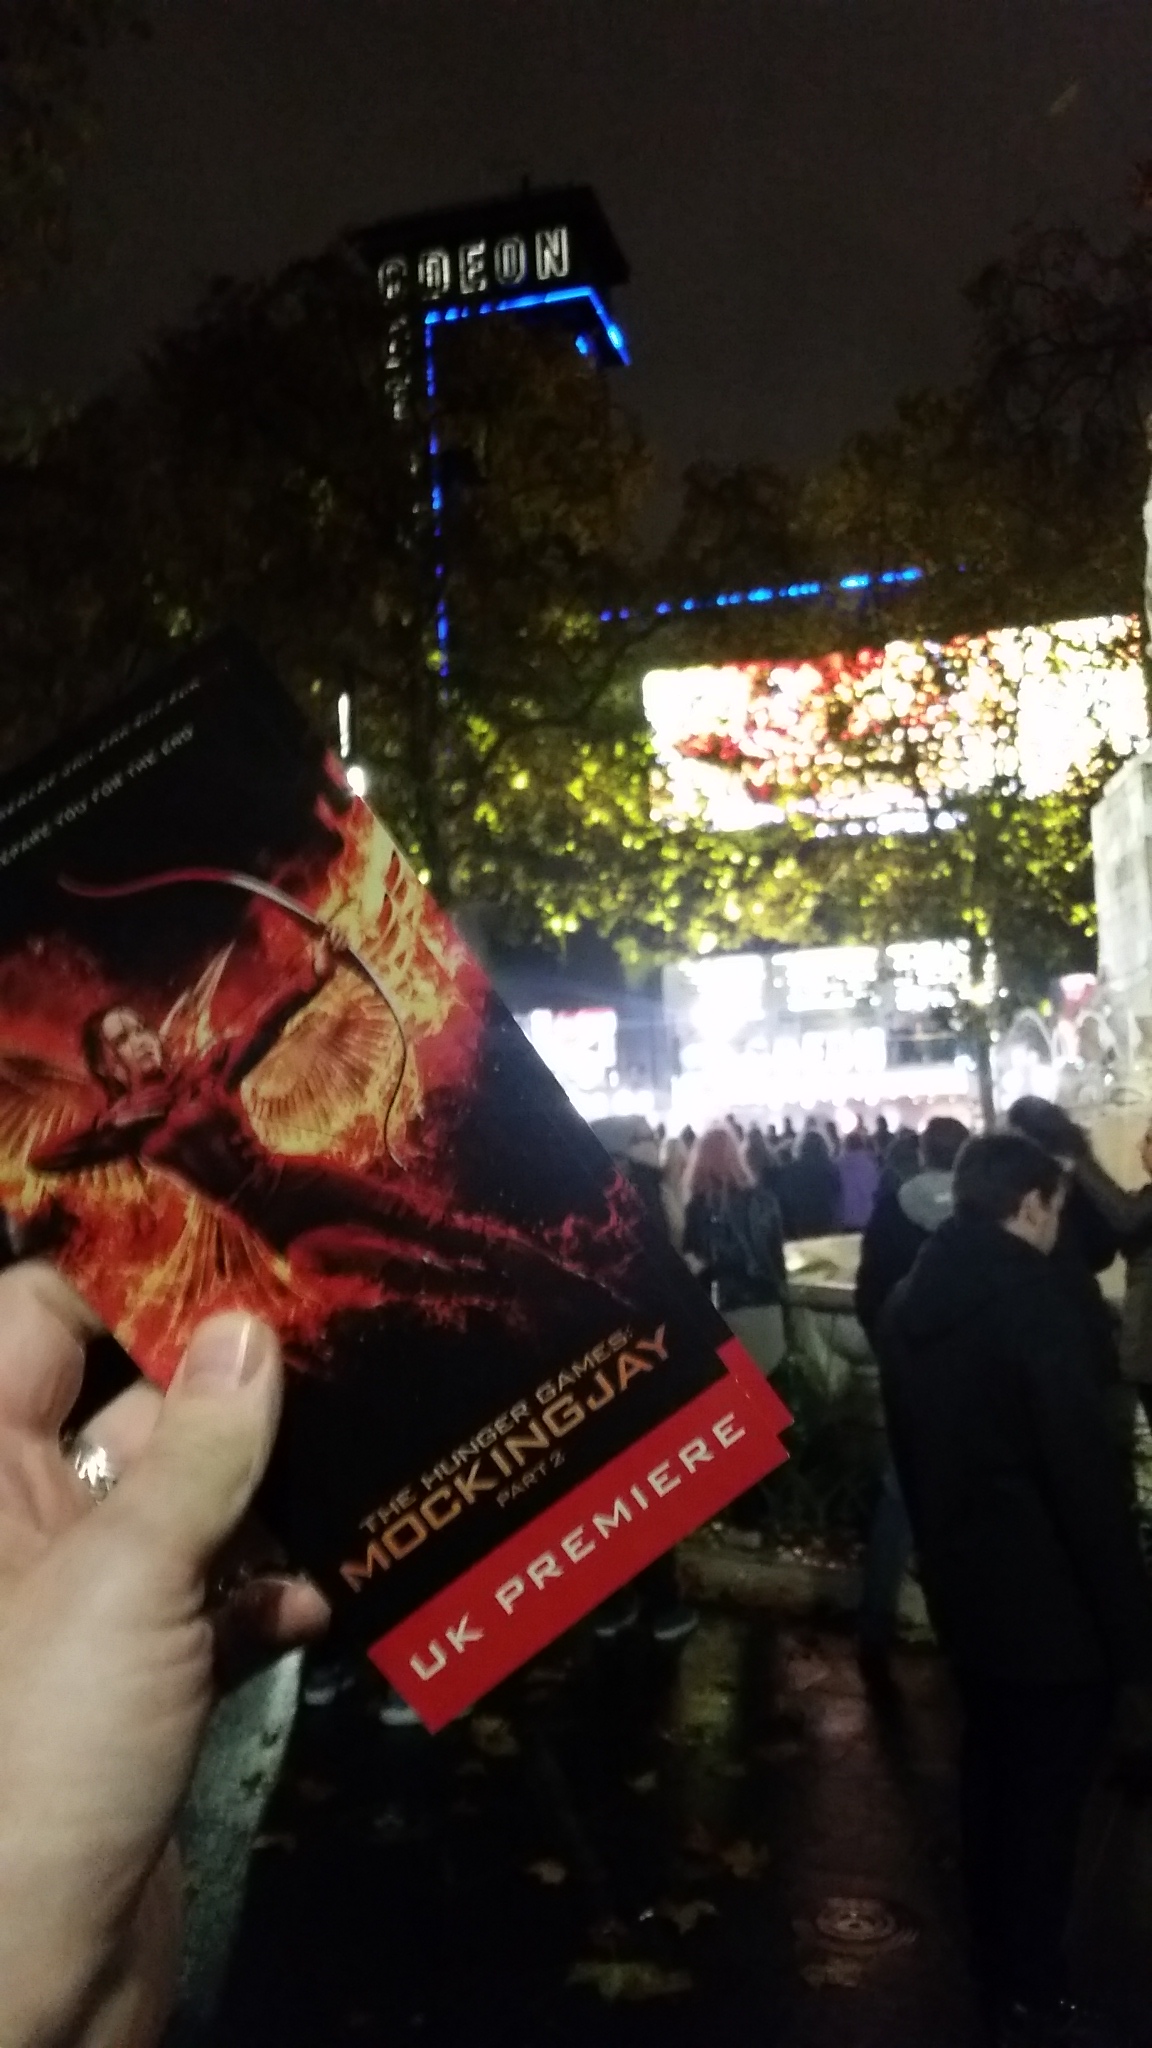 The Hunger Games Mocking Jay Part 2 Premier in London